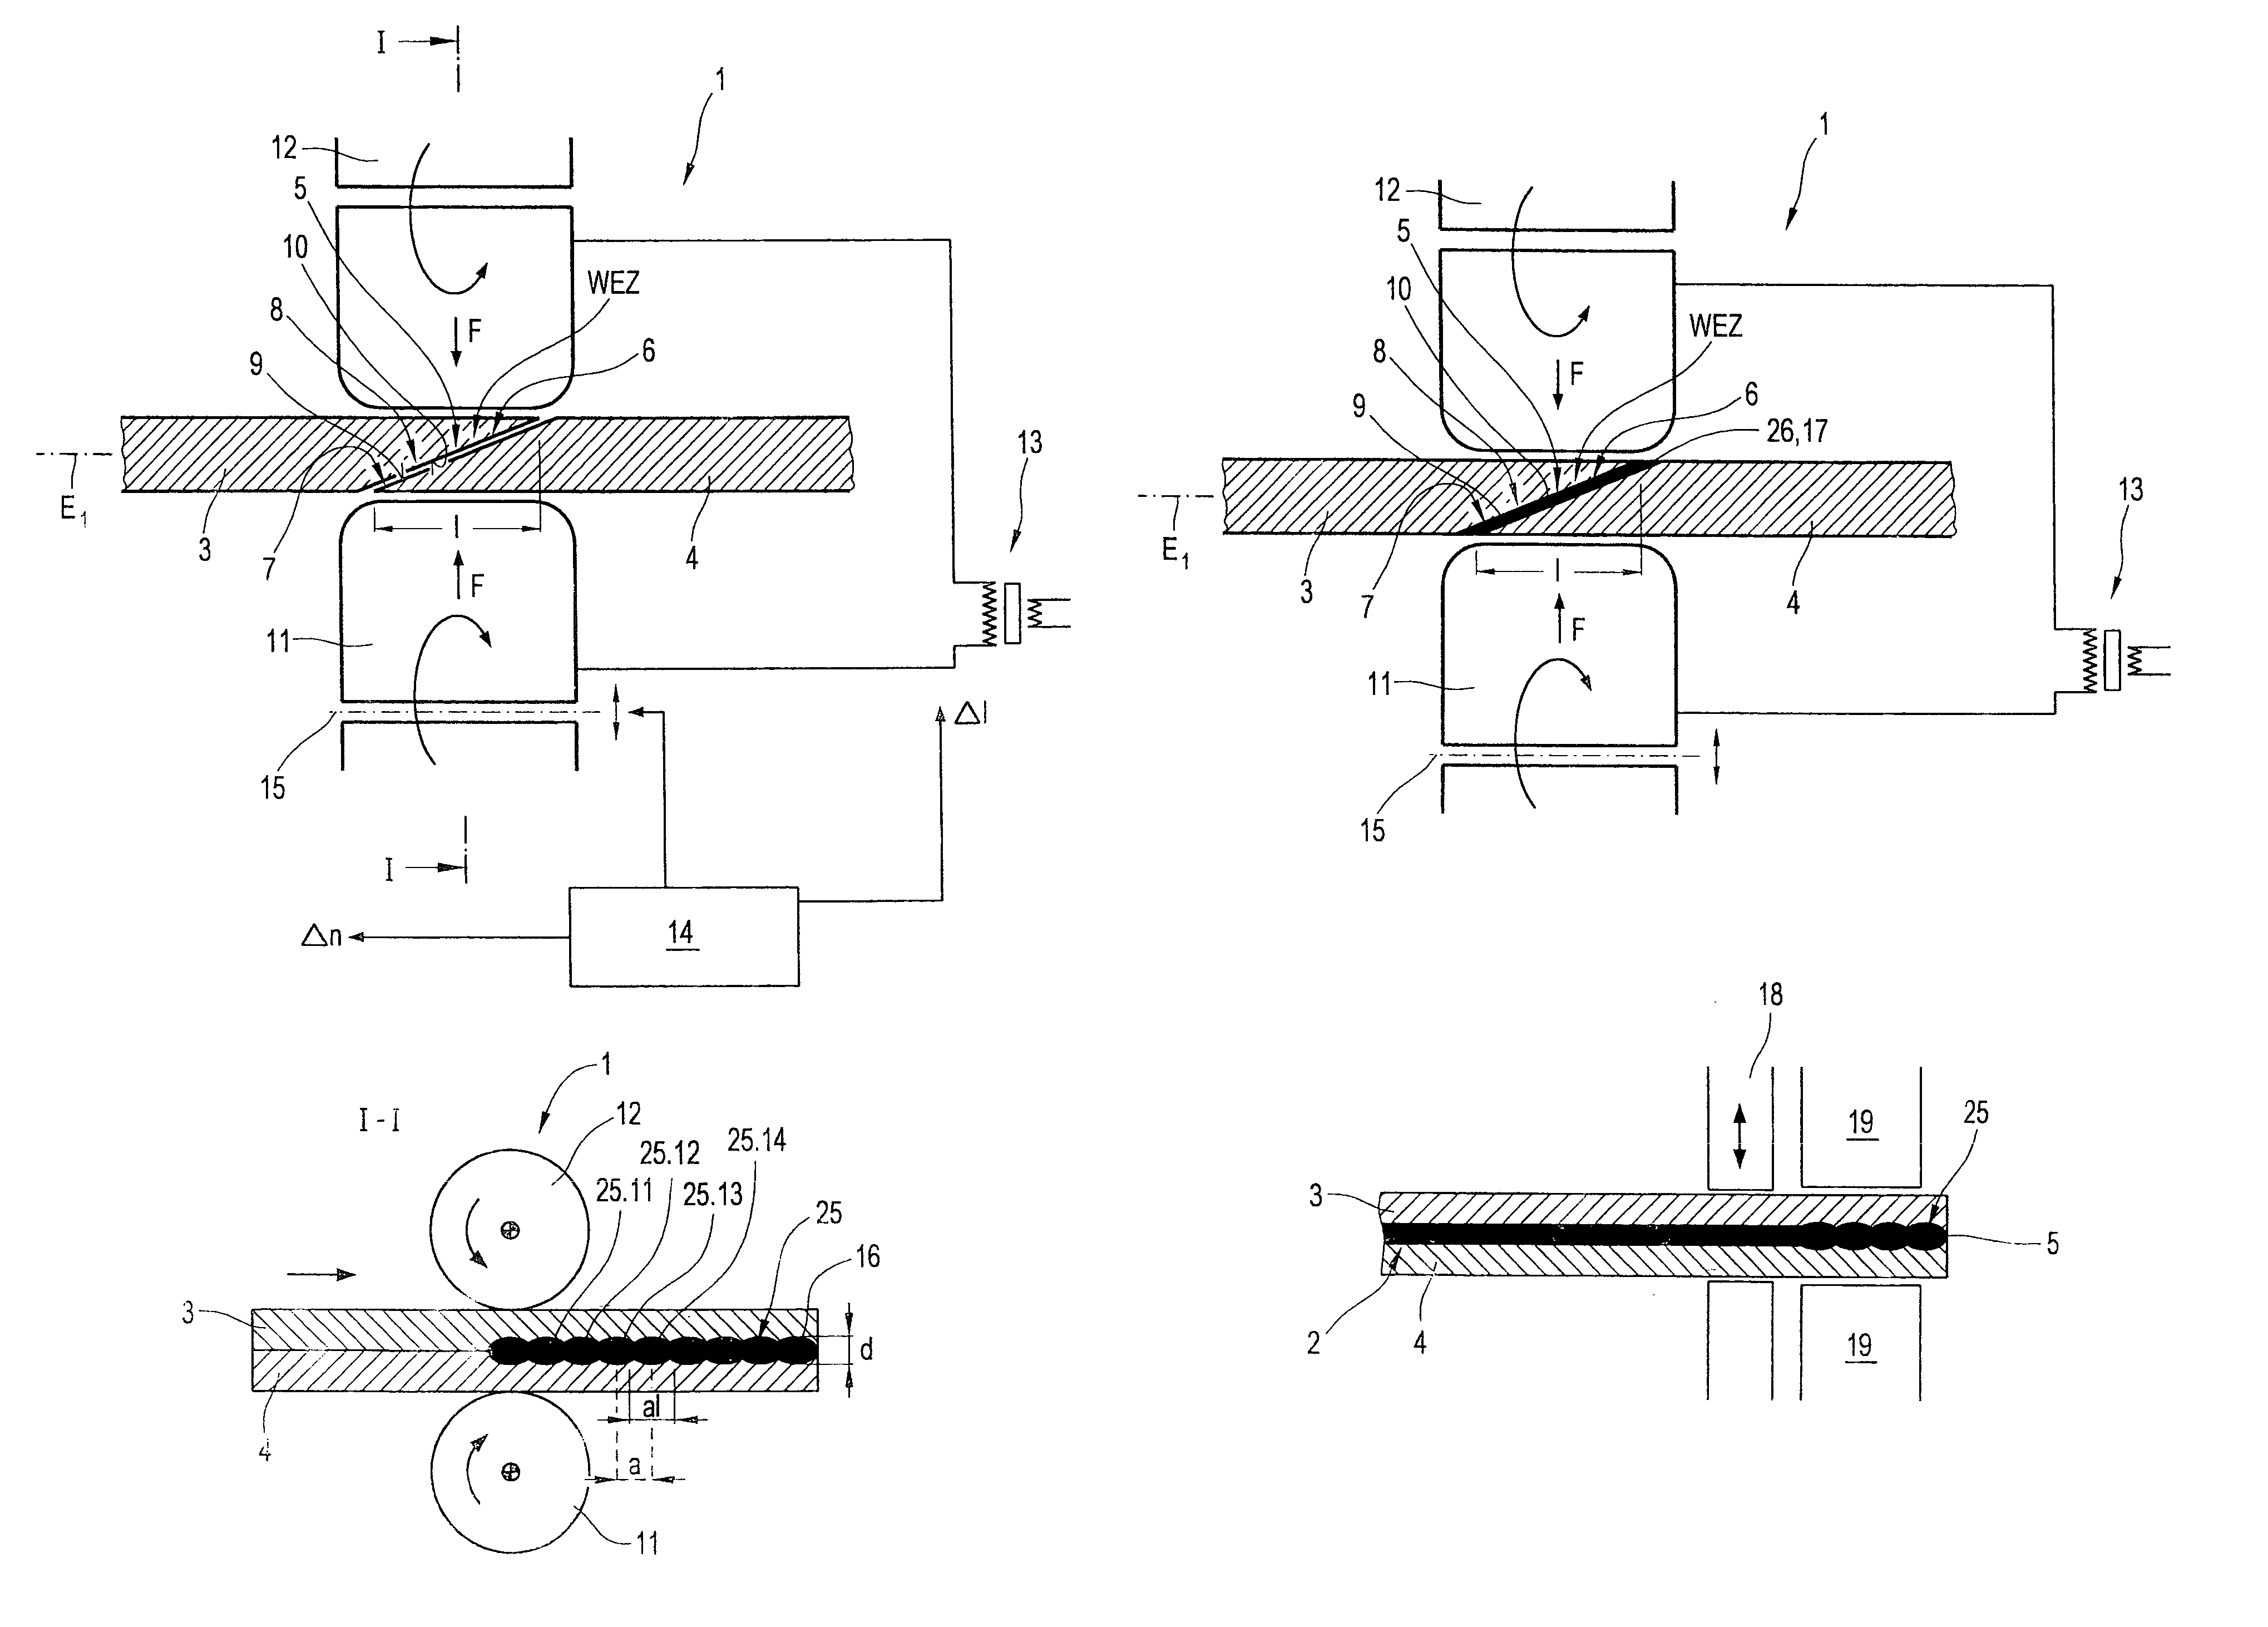 Method for producing permanent integral connections of oxide-dispersed (ODS) metallic materials or components of oxide-dispersed (ODS) metallic materials by welding